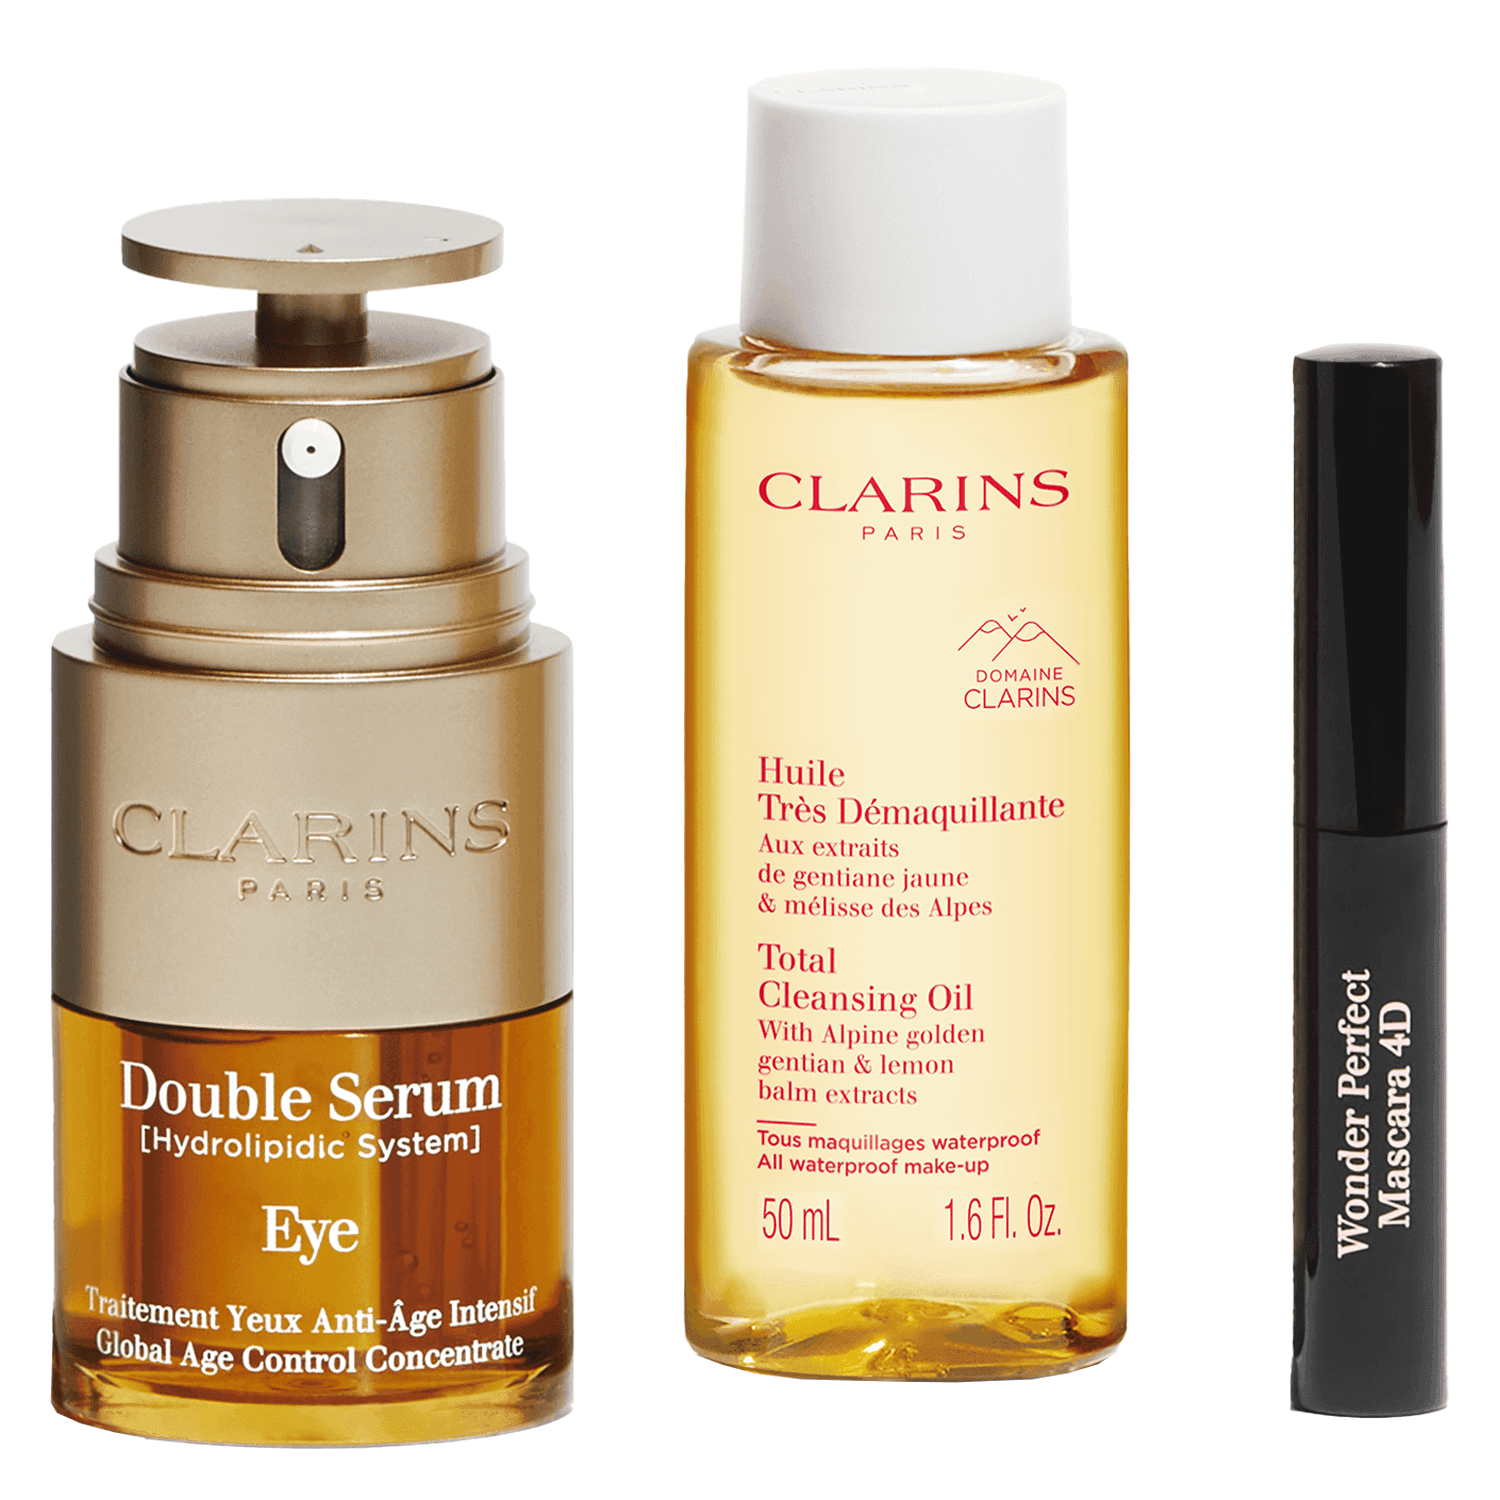 Clarins Specials - Double Serum Eye Skincare